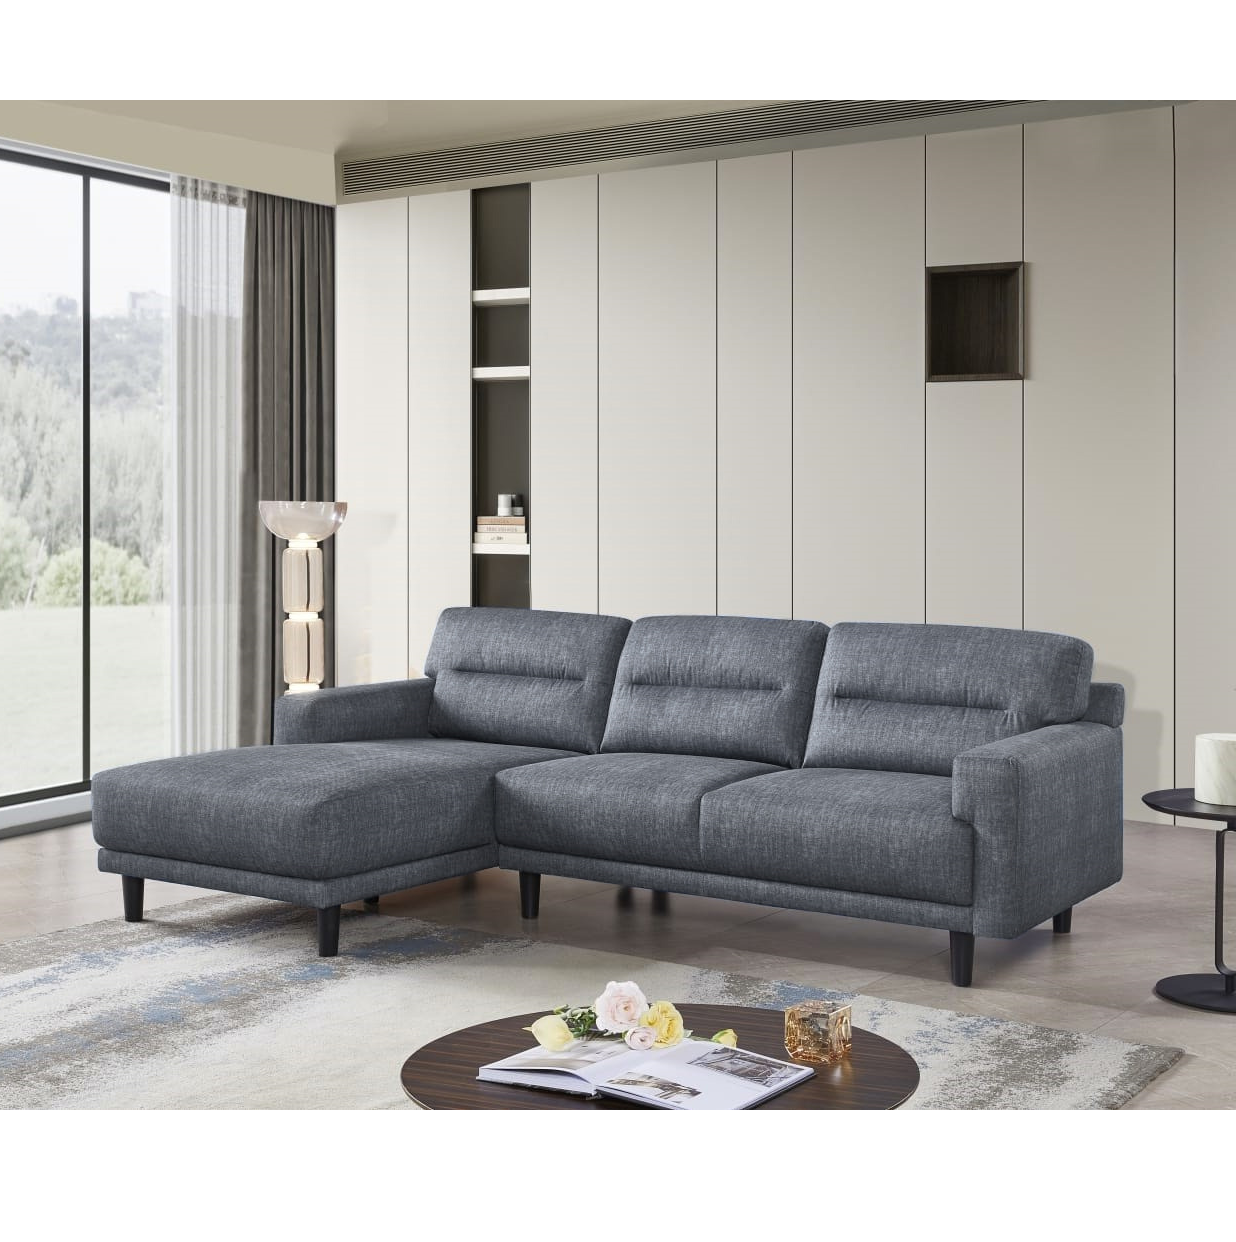 MB-2116 - 2-Seater Sofa+Left Chaise (When Facing) Grey - 47404